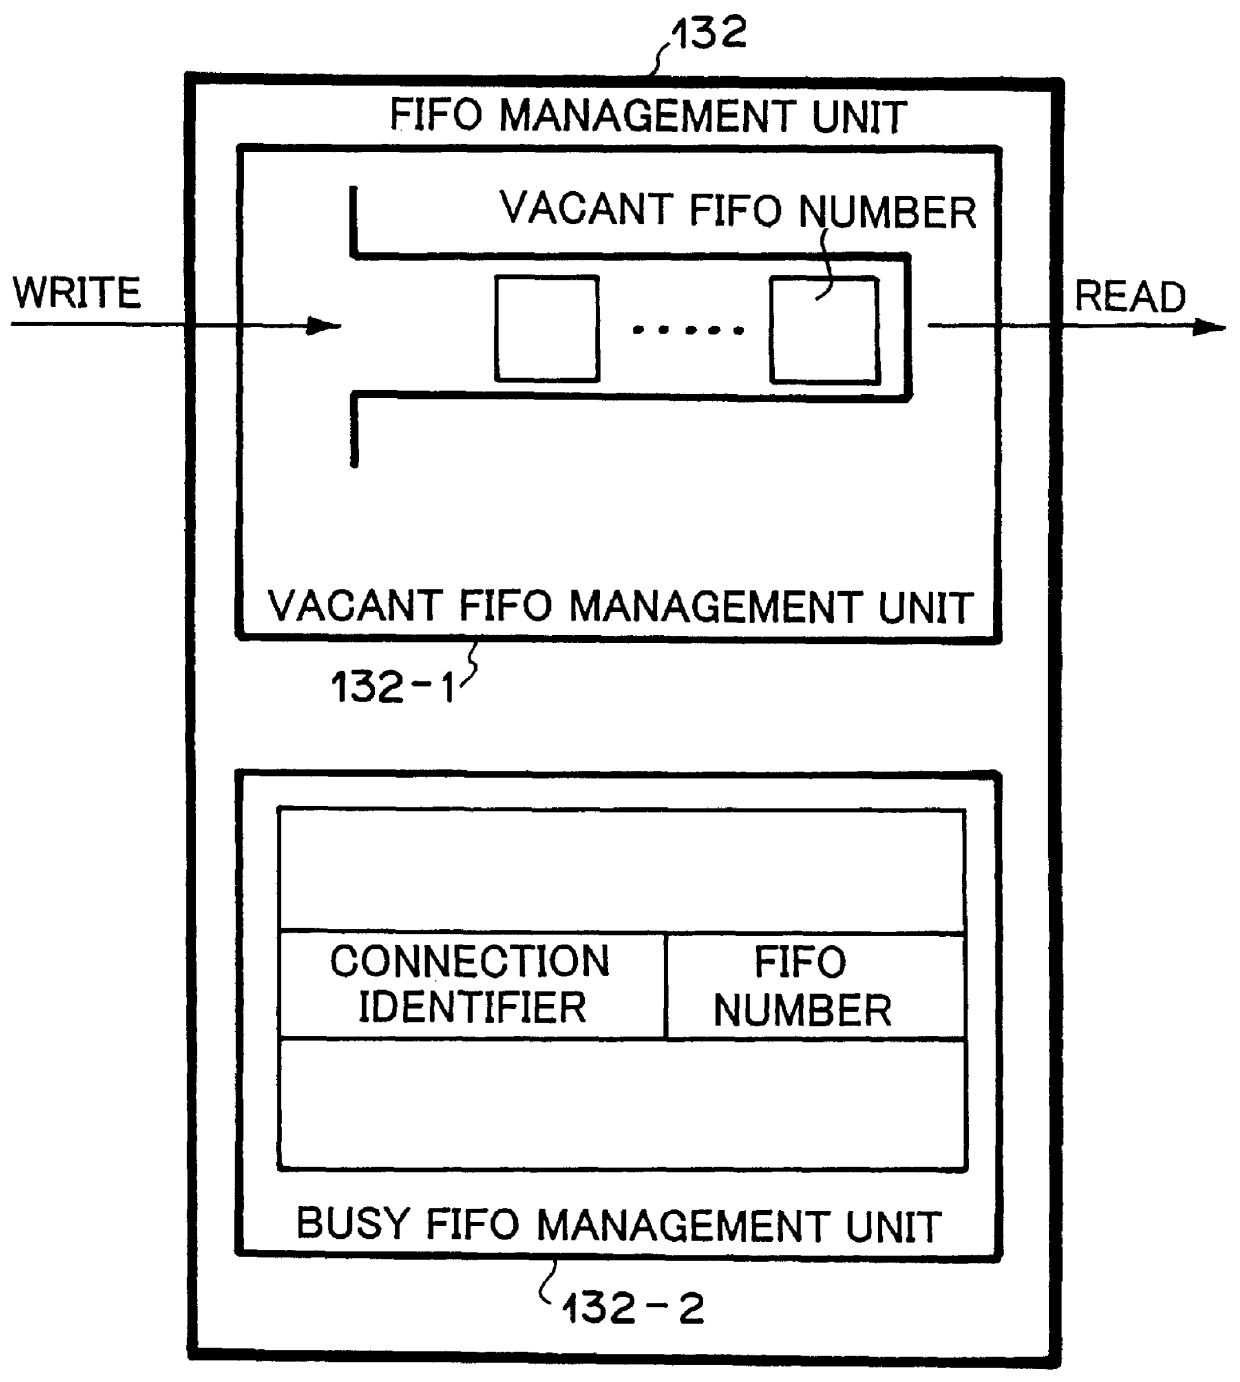 ATM switch capable of routing IP packet